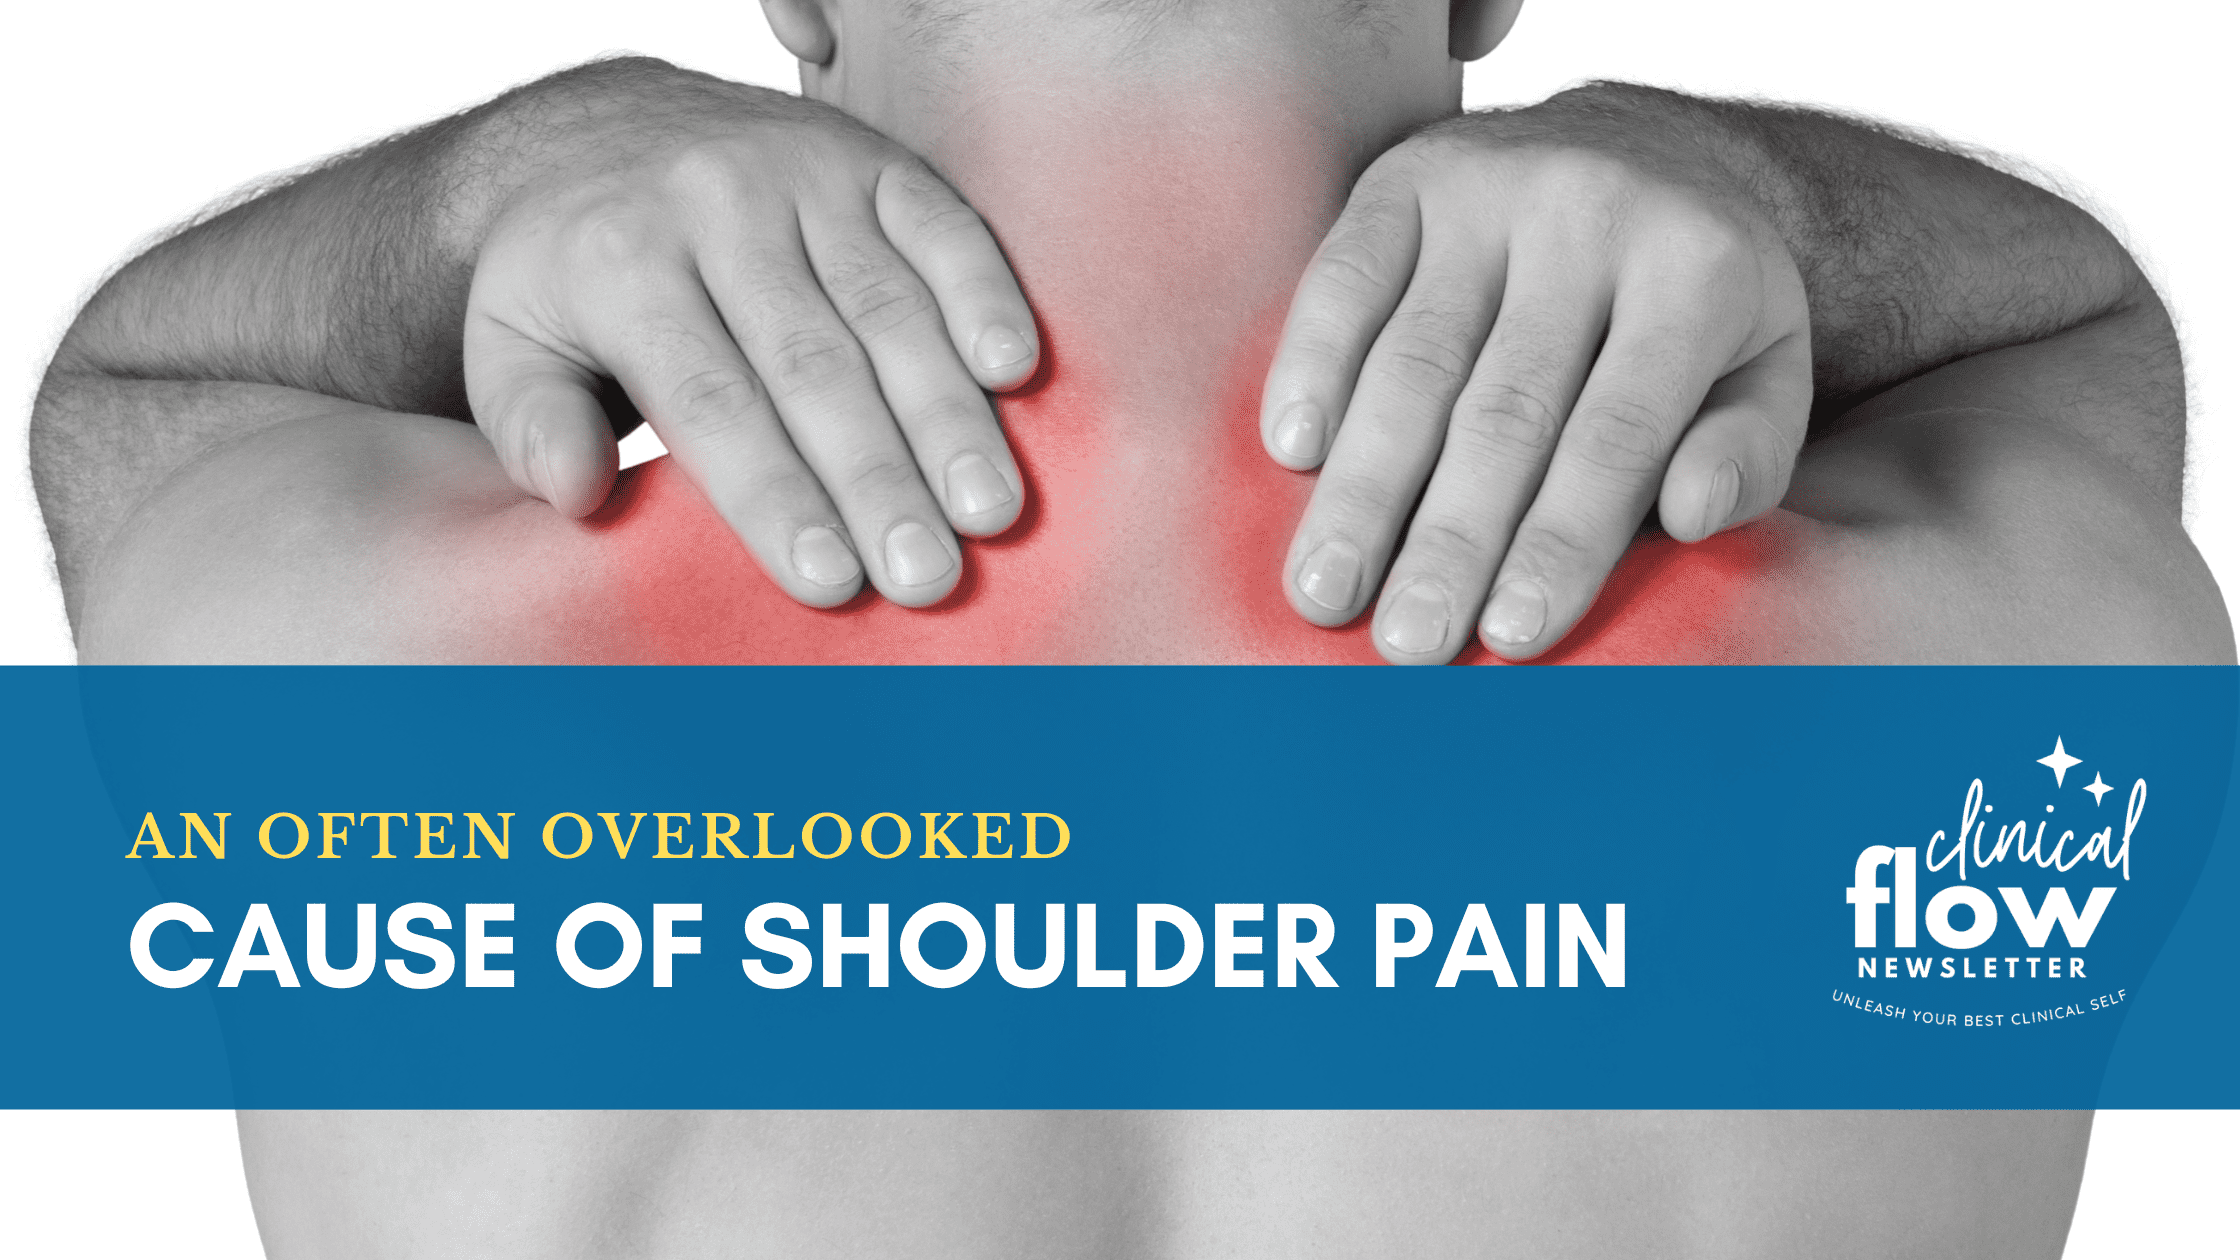 The often overlook cause of shoulder pain.